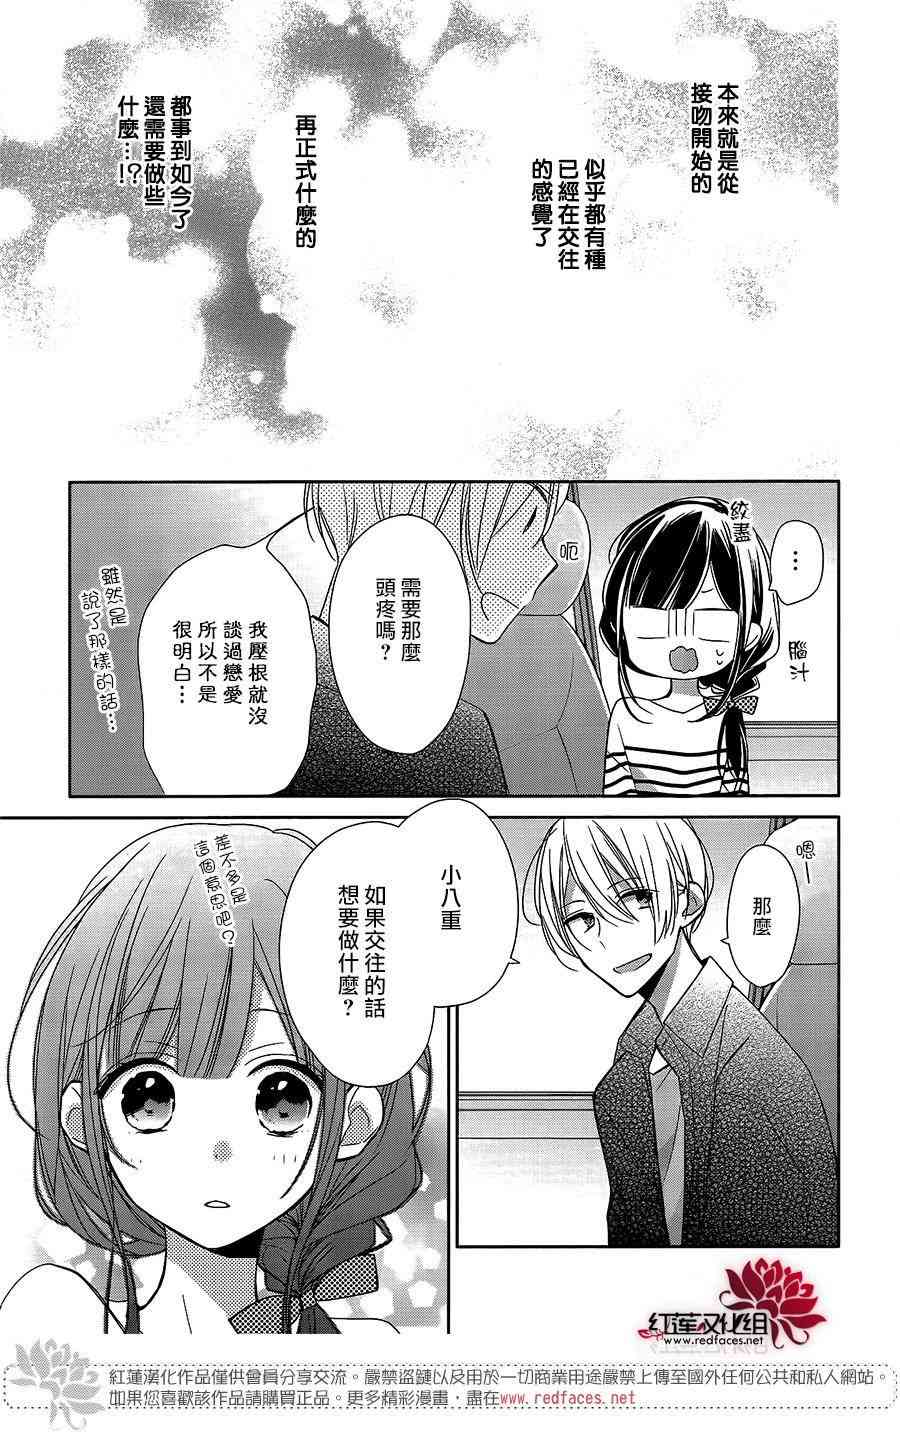 If given a second chance - 7話 - 5